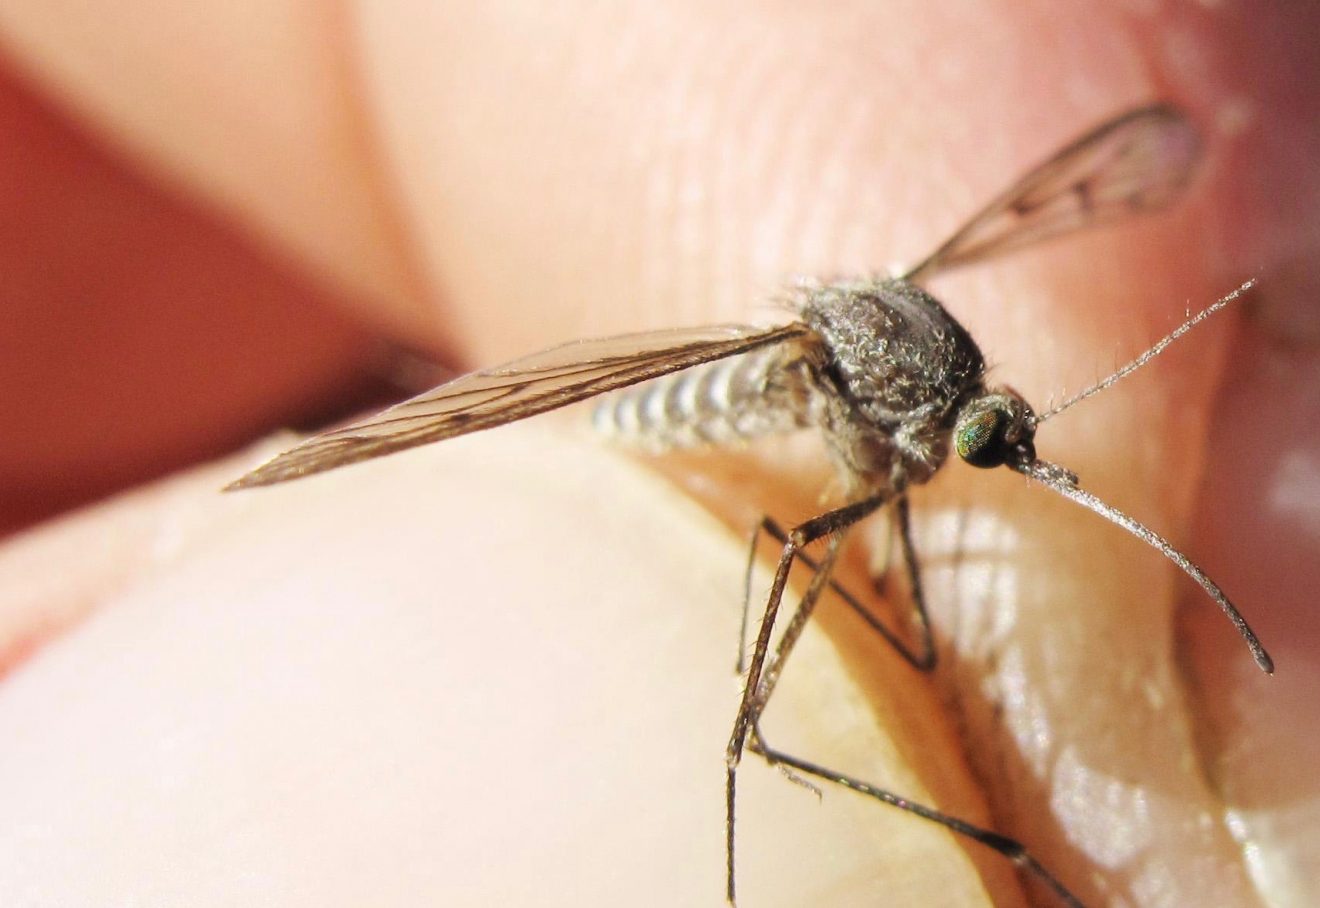 It’s time for Alaska’s mosquitoes to shine